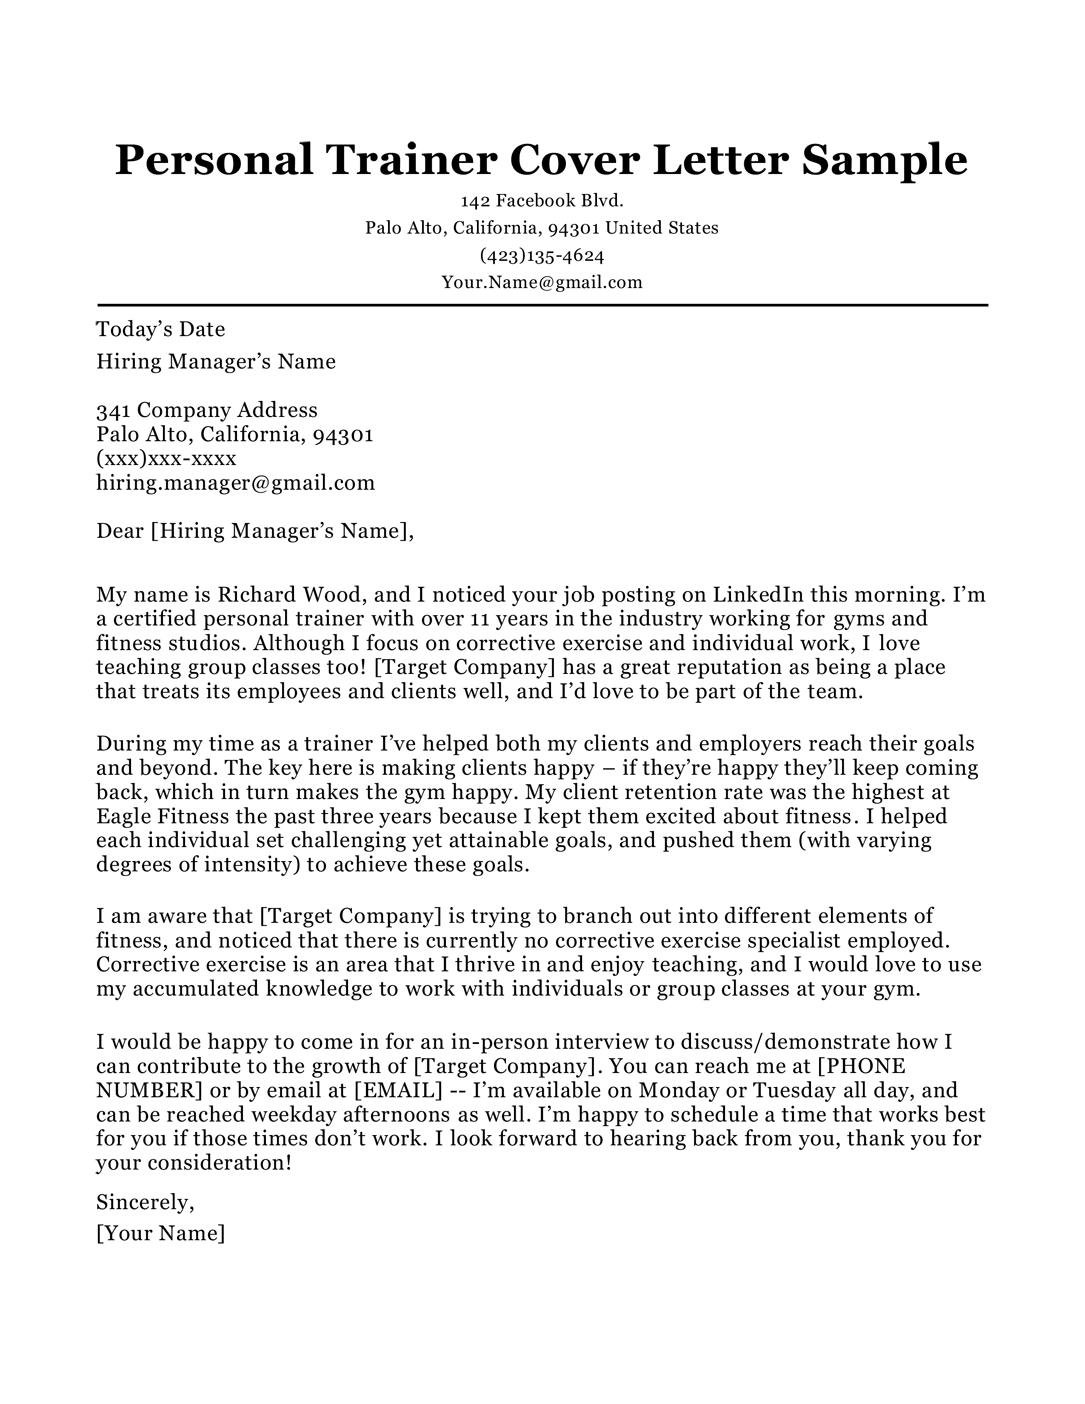 Personal Trainer Cover Letter Sample & Tips | Resume Companion